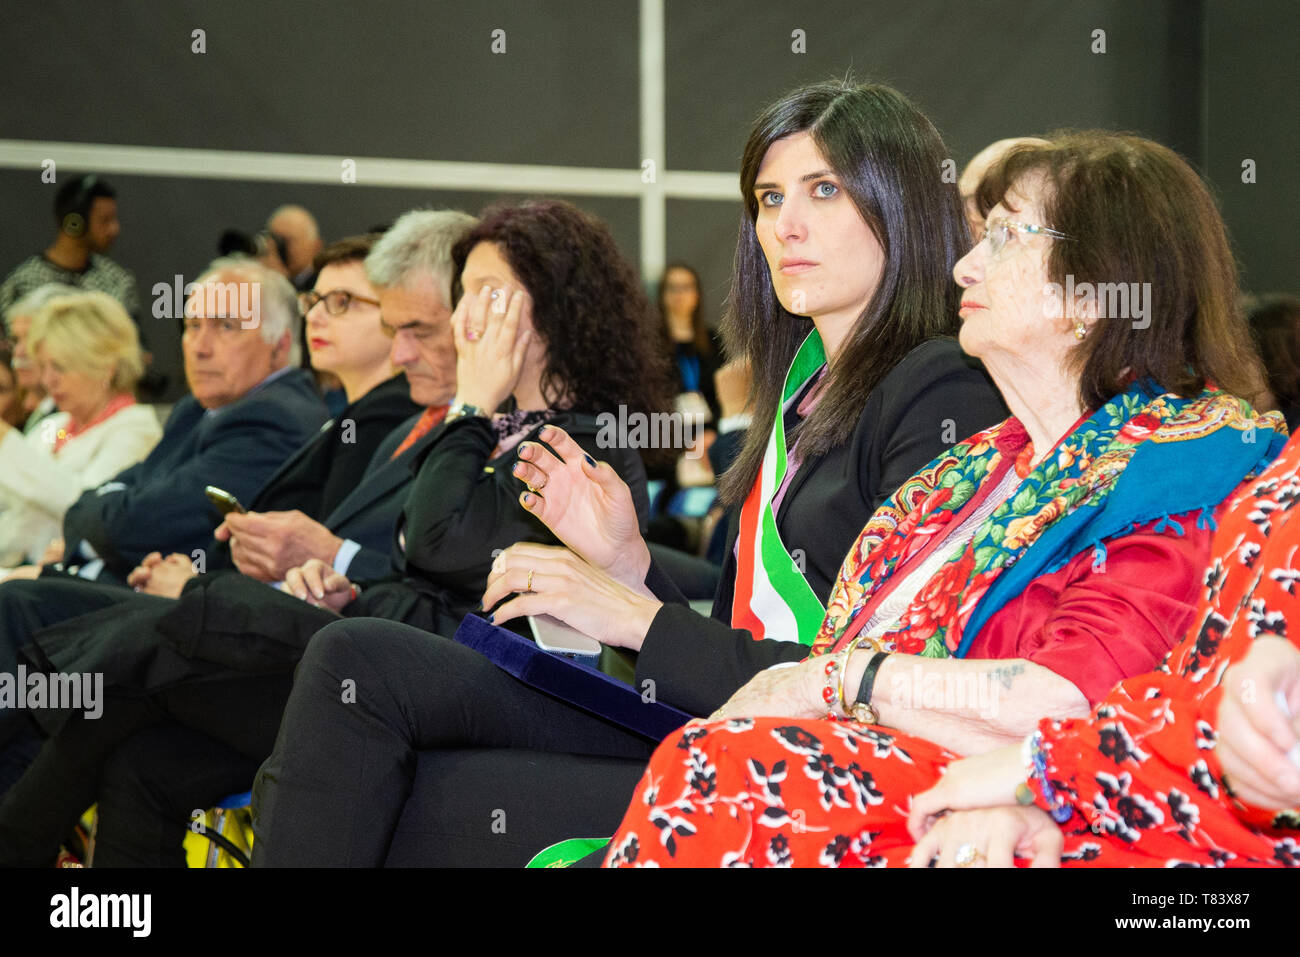 Chiara Appendino mayor of Turin seen during the event. The International Book Fair is the most important Italian event in the publishing field. It takes place at the Lingotto Fiere conference centre in Turin once a year, in the month of May. Stock Photo